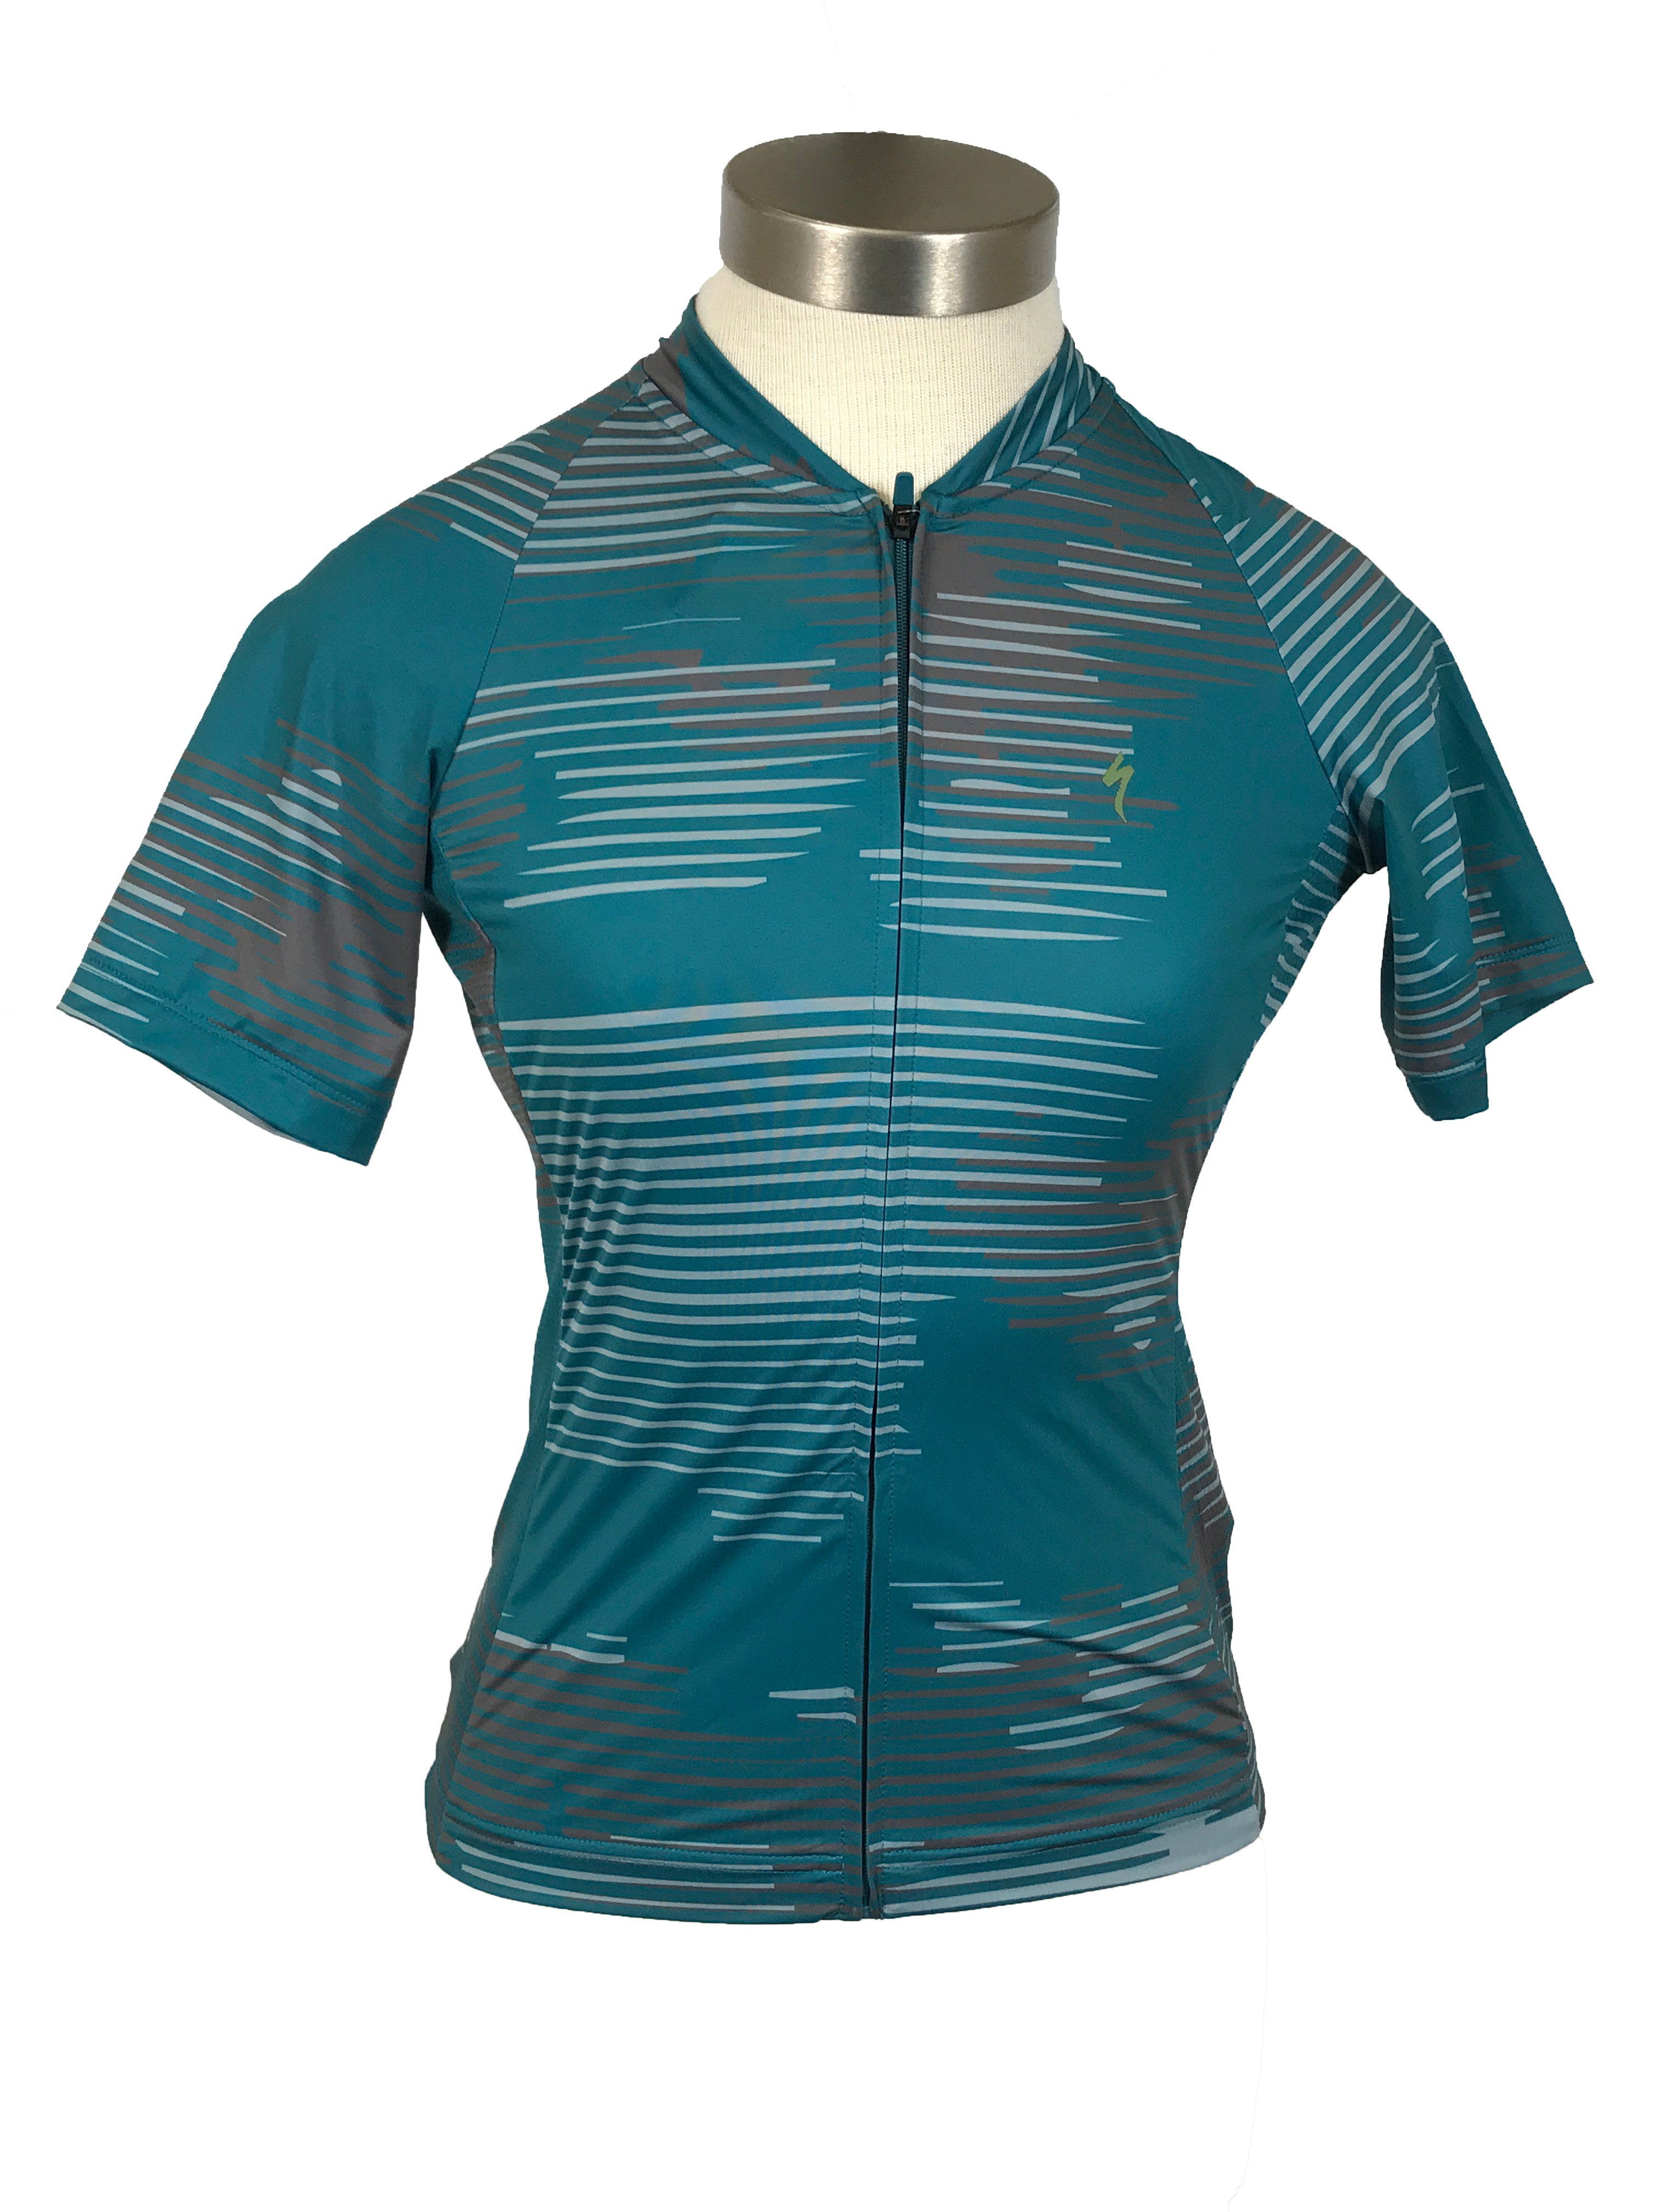 Specialized SL Blur Tropical Teal Short Sleeve Jersey Women's Size M NWT